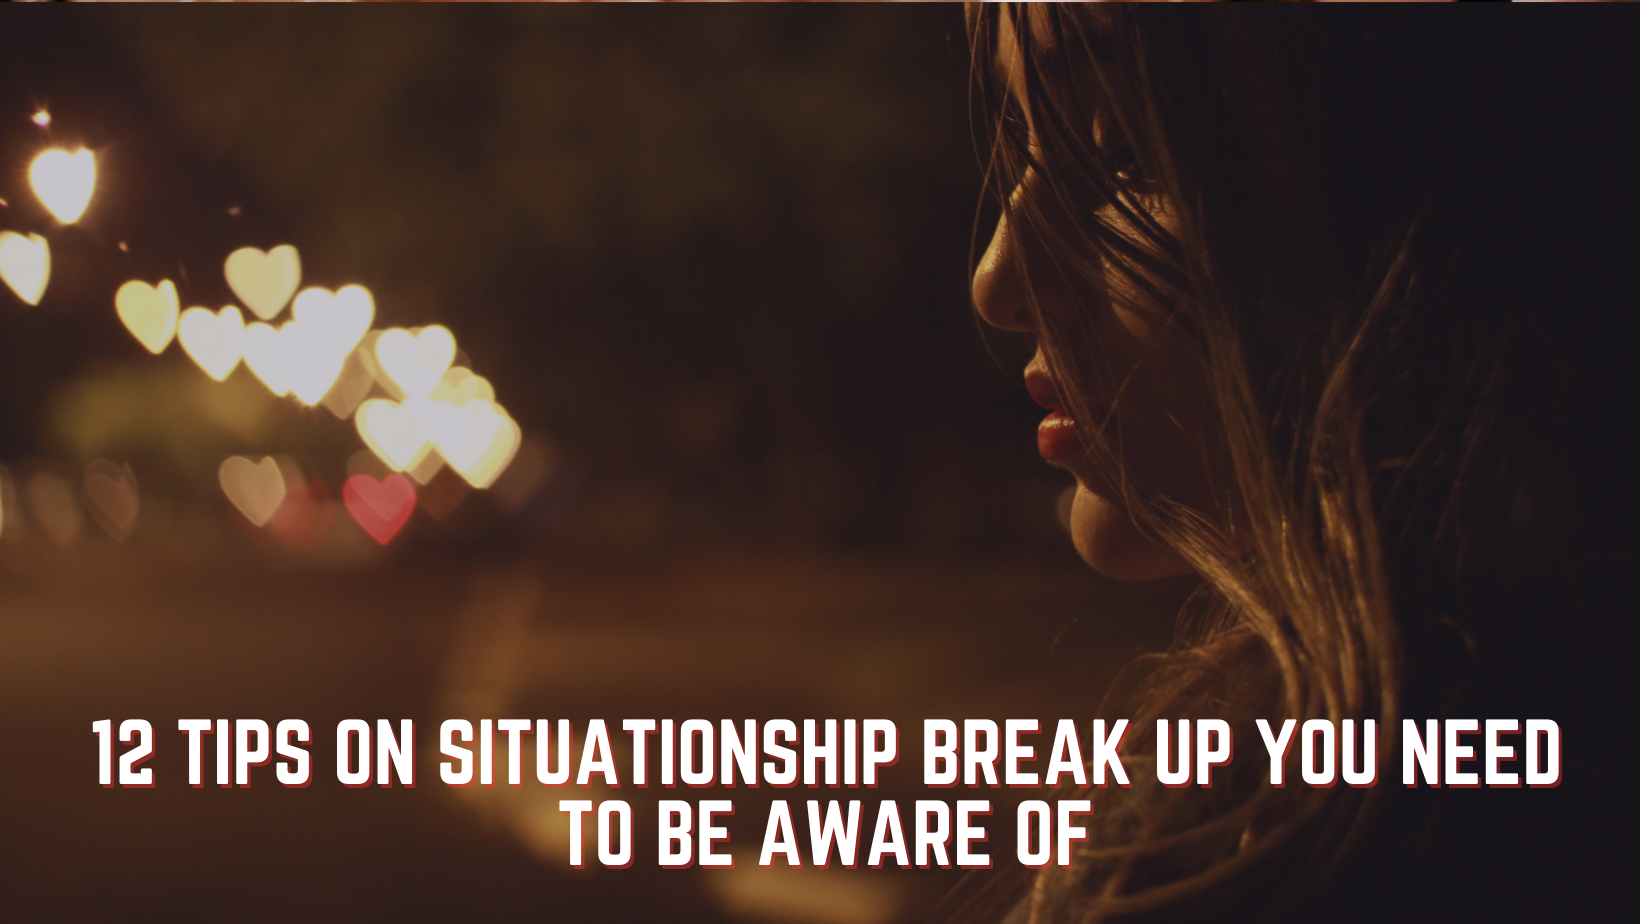 Situationship Break Up